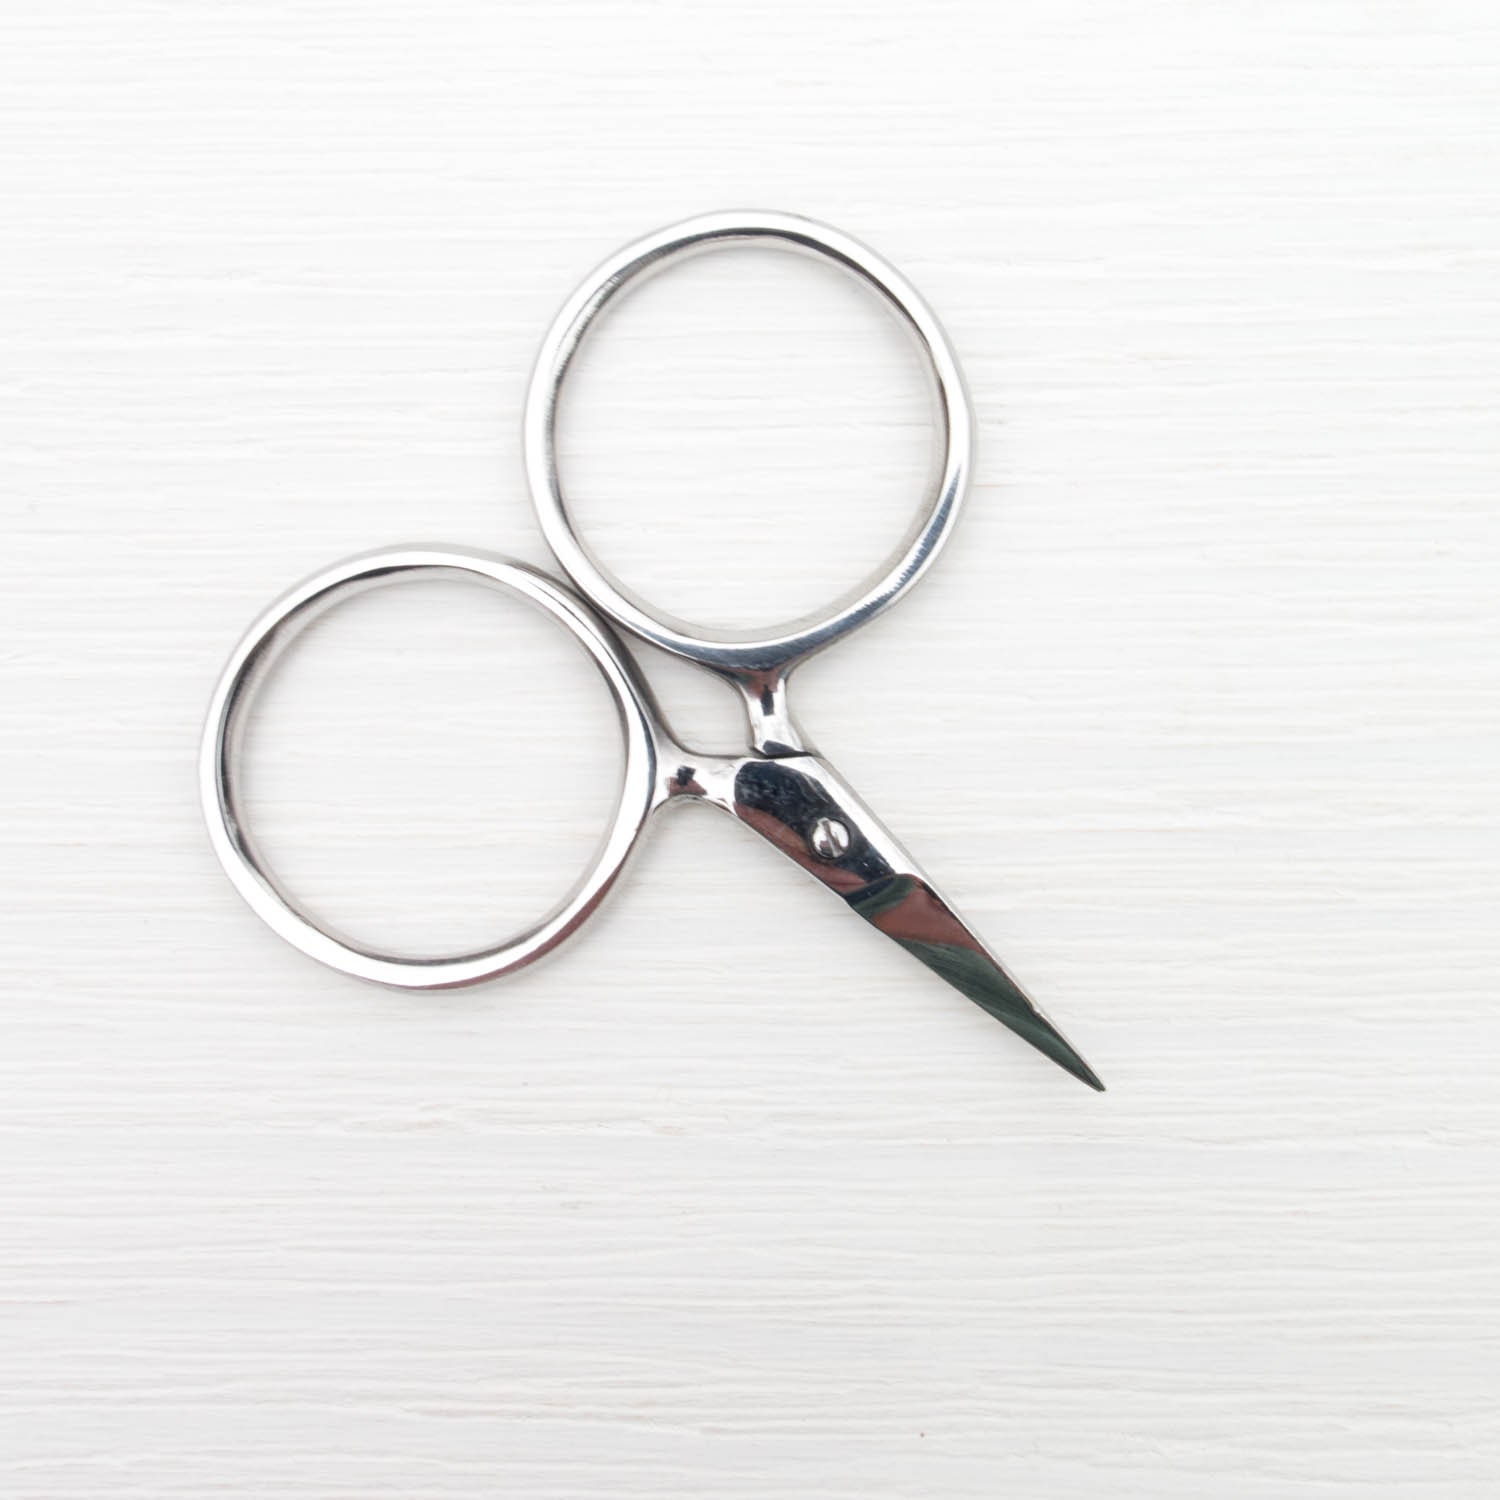 5 Blunt-Tip Double Curved Embroidery Scissors